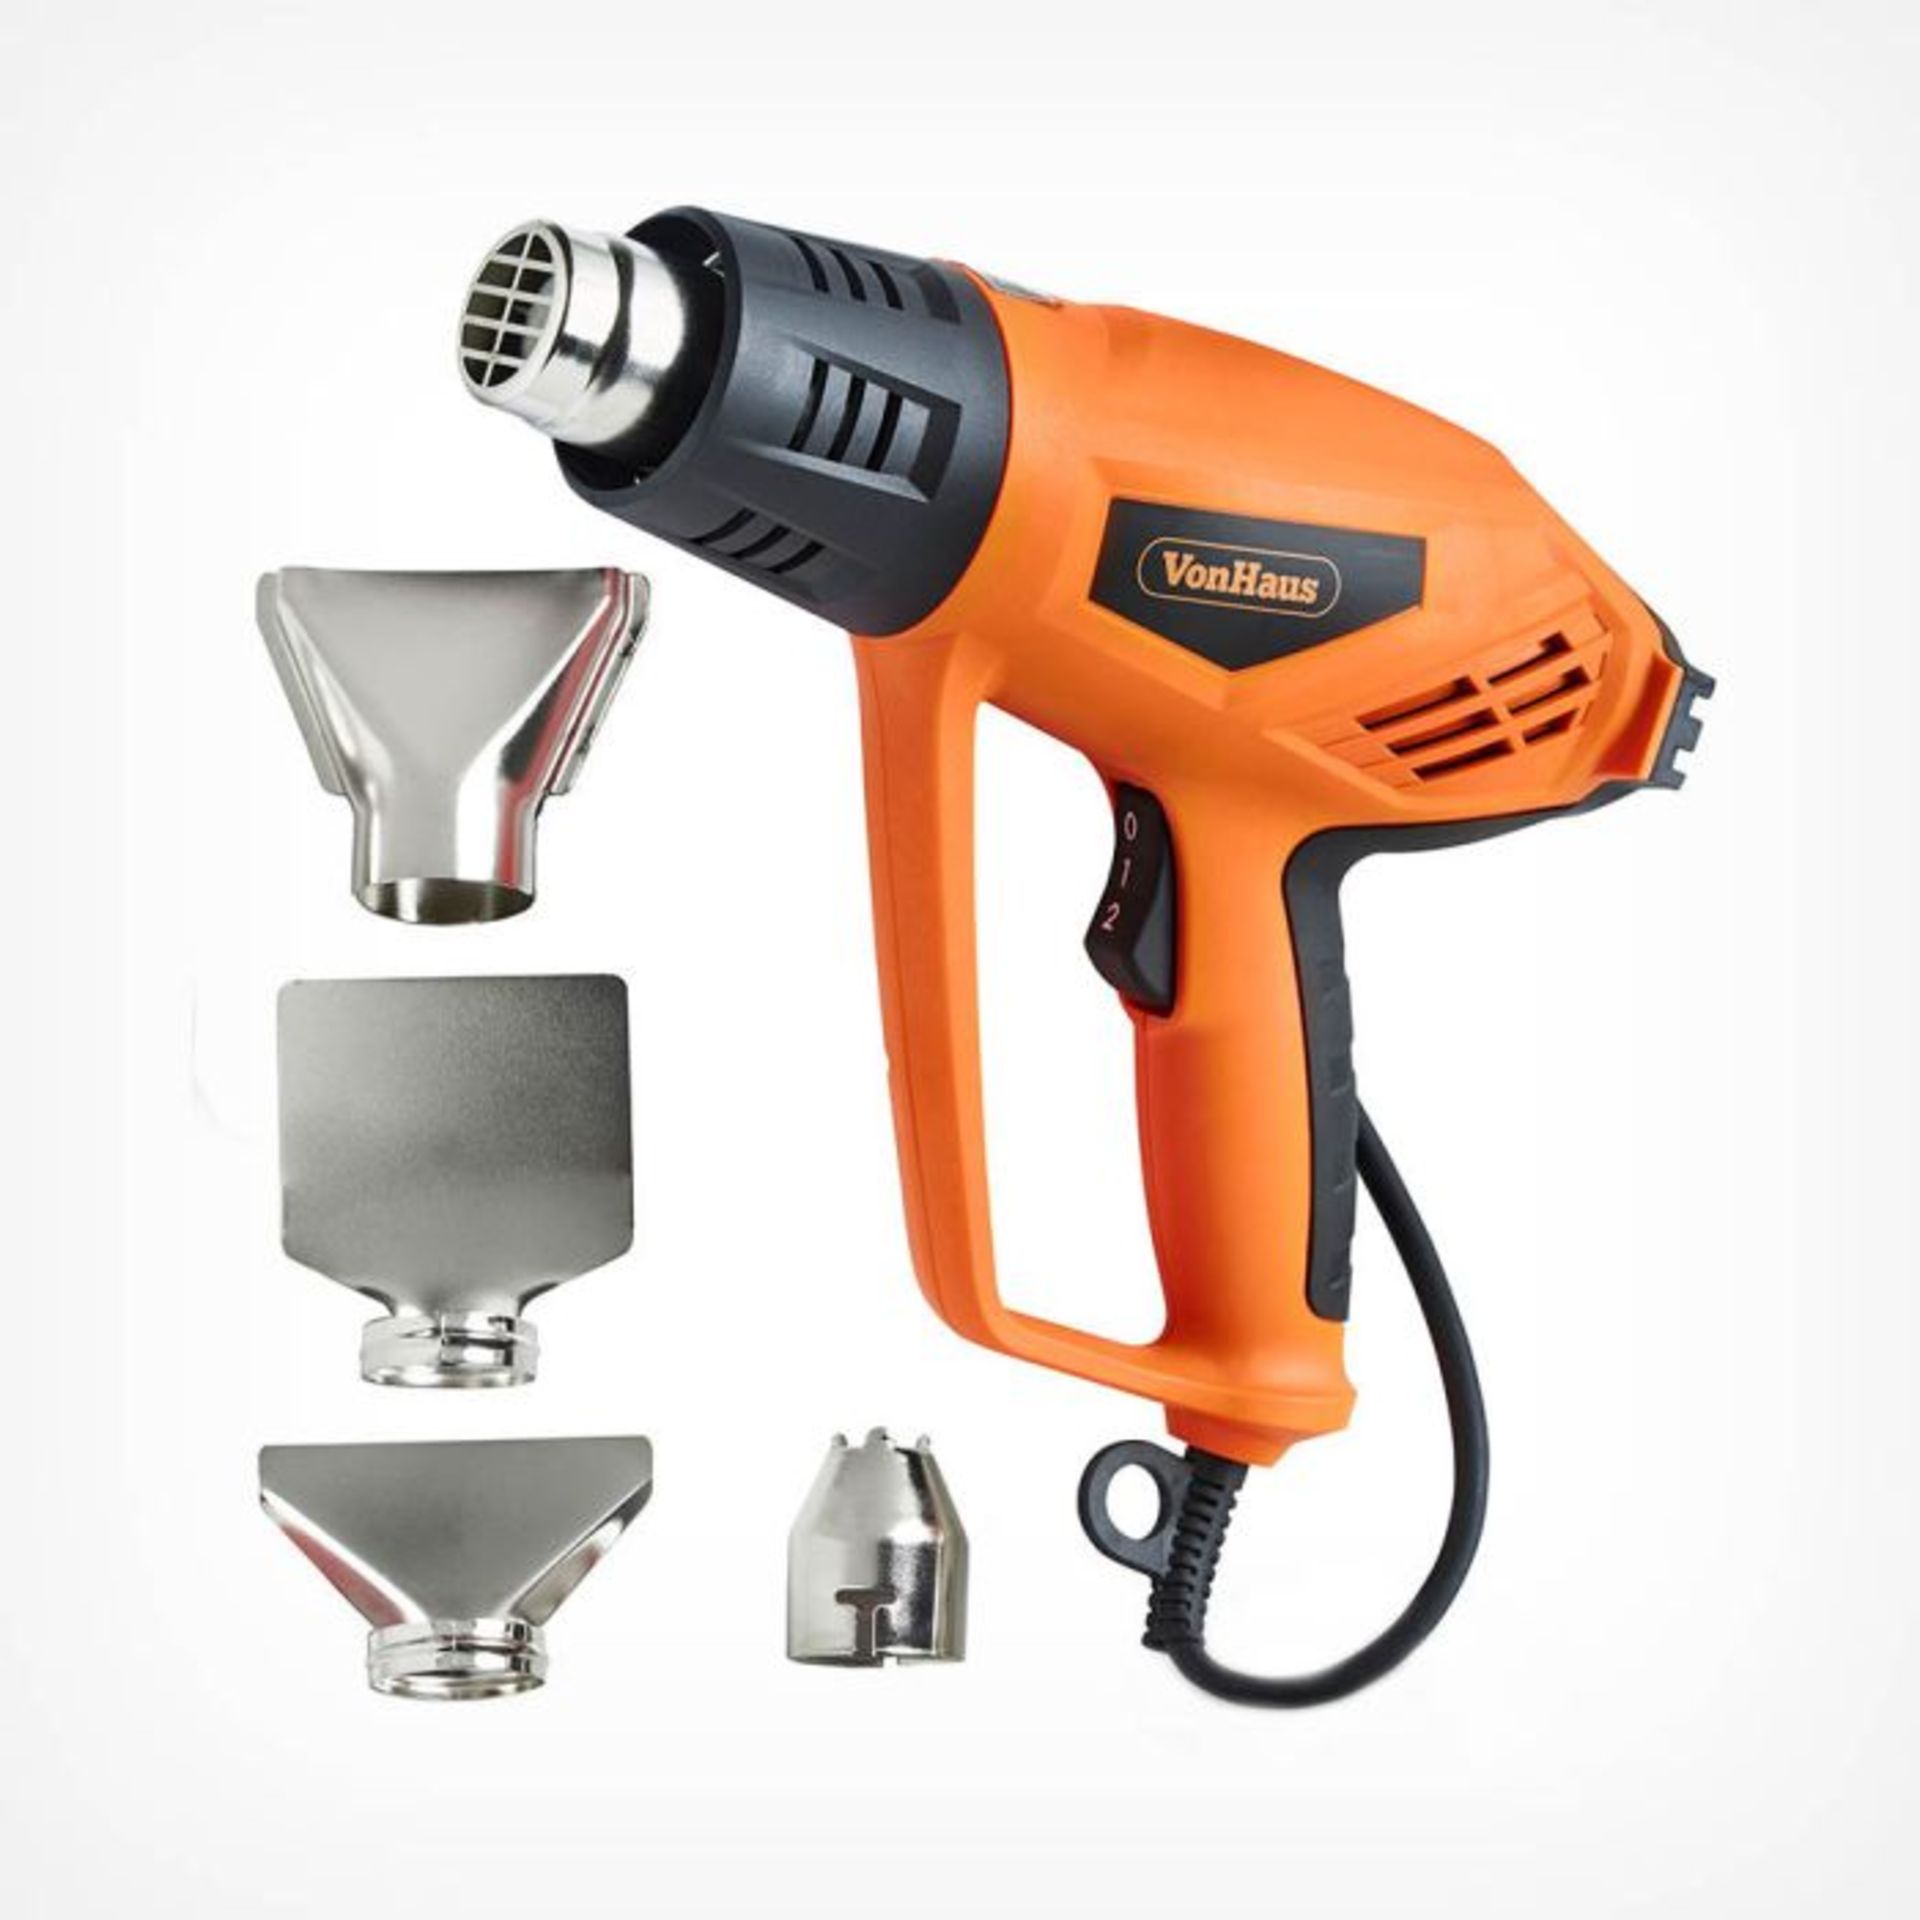 2000W Heat Gun. -ER35. Ever tried scraping off paint or taking up vinyl flooring with hand tools